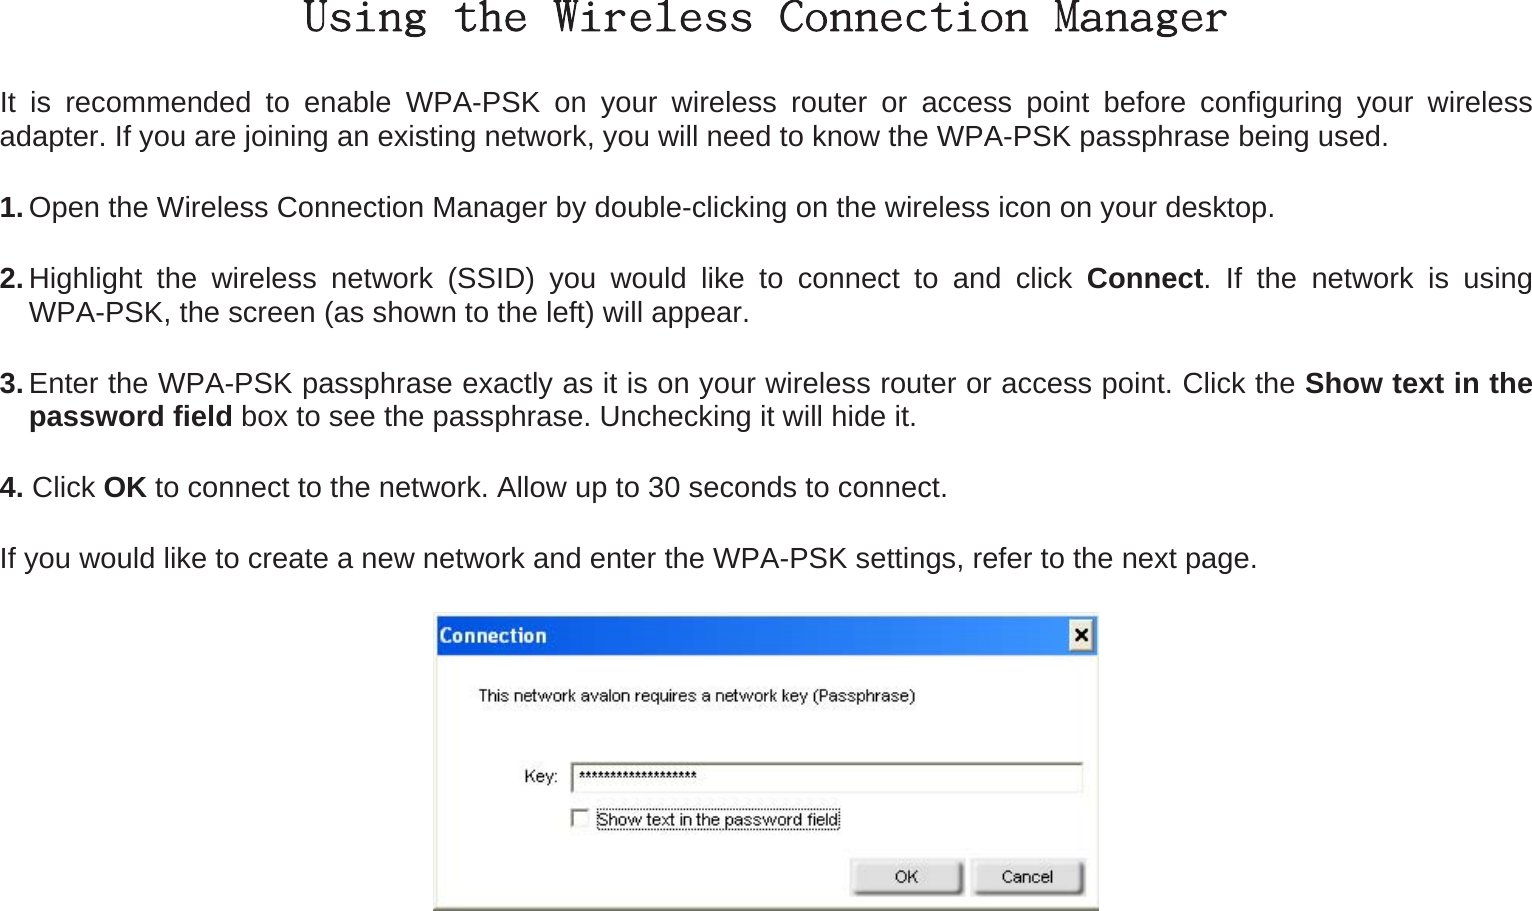 Using the Wireless Connection Manager It is recommended to enable WPA-PSK on your wireless router or access point before configuring your wireless adapter. If you are joining an existing network, you will need to know the WPA-PSK passphrase being used. 1. Open the Wireless Connection Manager by double-clicking on the wireless icon on your desktop.   2. Highlight the wireless network (SSID) you would like to connect to and click Connect. If the network is using WPA-PSK, the screen (as shown to the left) will appear.   3. Enter the WPA-PSK passphrase exactly as it is on your wireless router or access point. Click the Show text in the password field box to see the passphrase. Unchecking it will hide it. 4. Click OK to connect to the network. Allow up to 30 seconds to connect. If you would like to create a new network and enter the WPA-PSK settings, refer to the next page.  